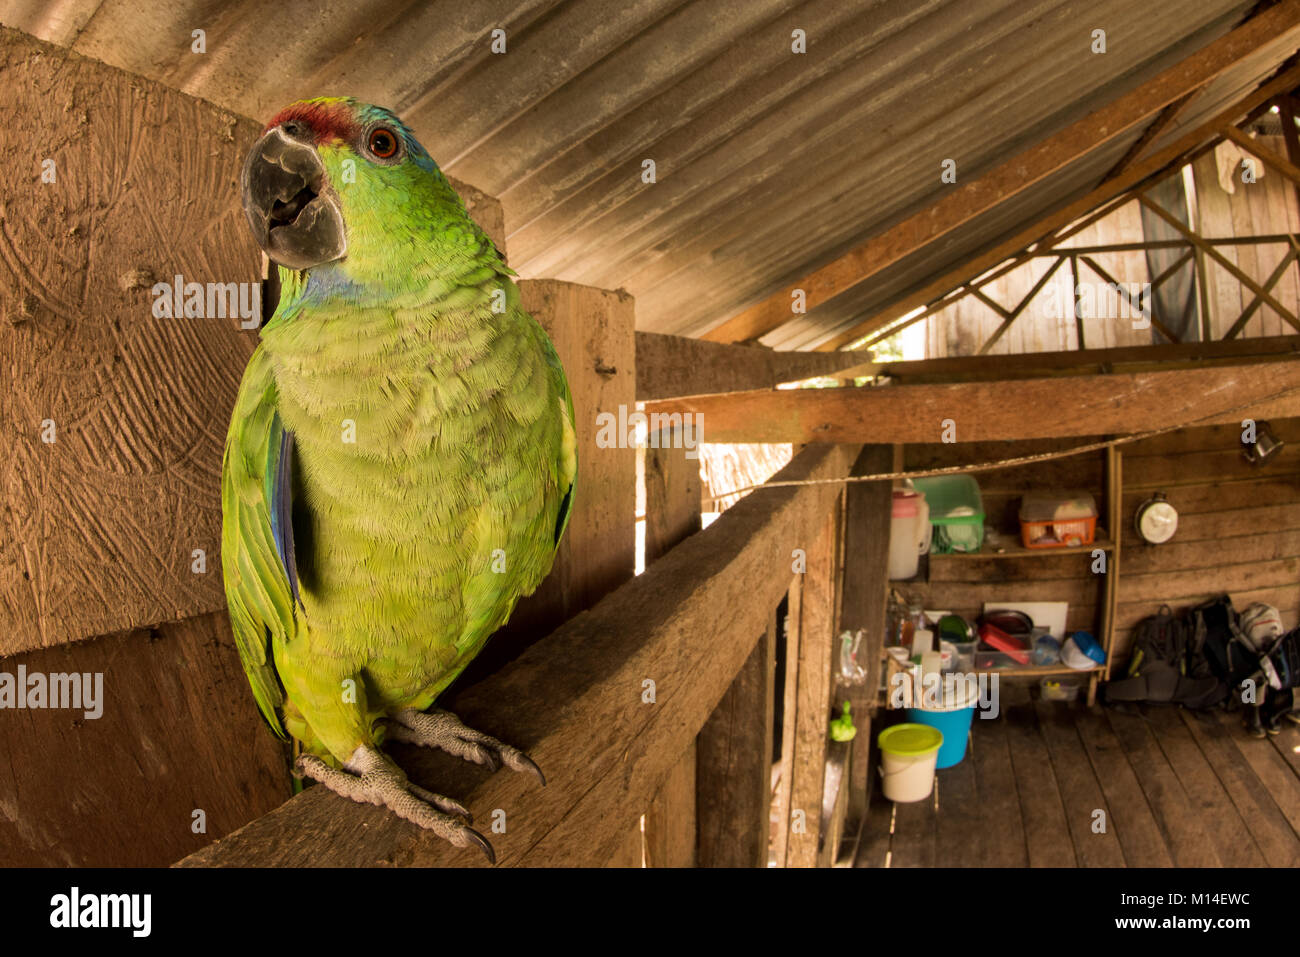 A festive Amazon parrot (Amazona festiva) being kept as a pet in a Colombian village. Stock Photo